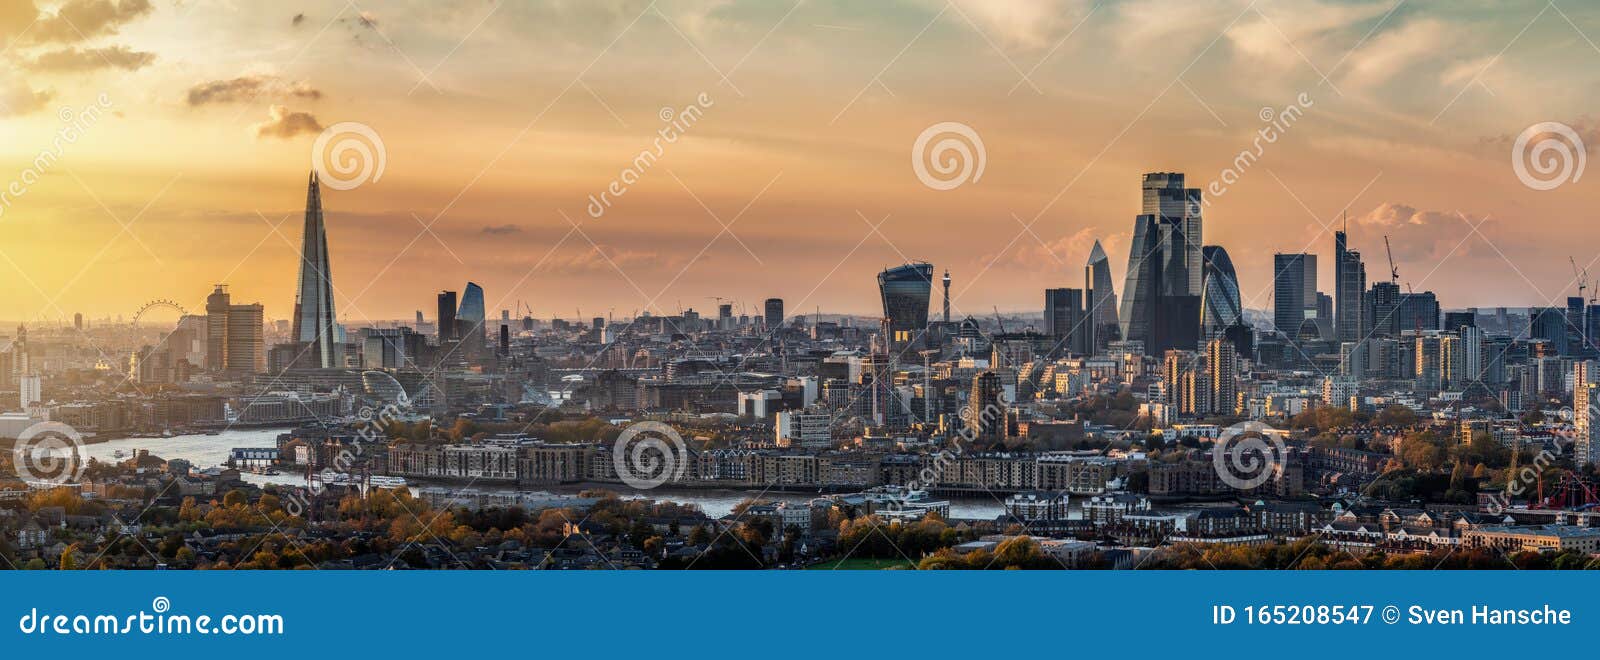 panoramic, elevated view to the skyline of london, united kingdom